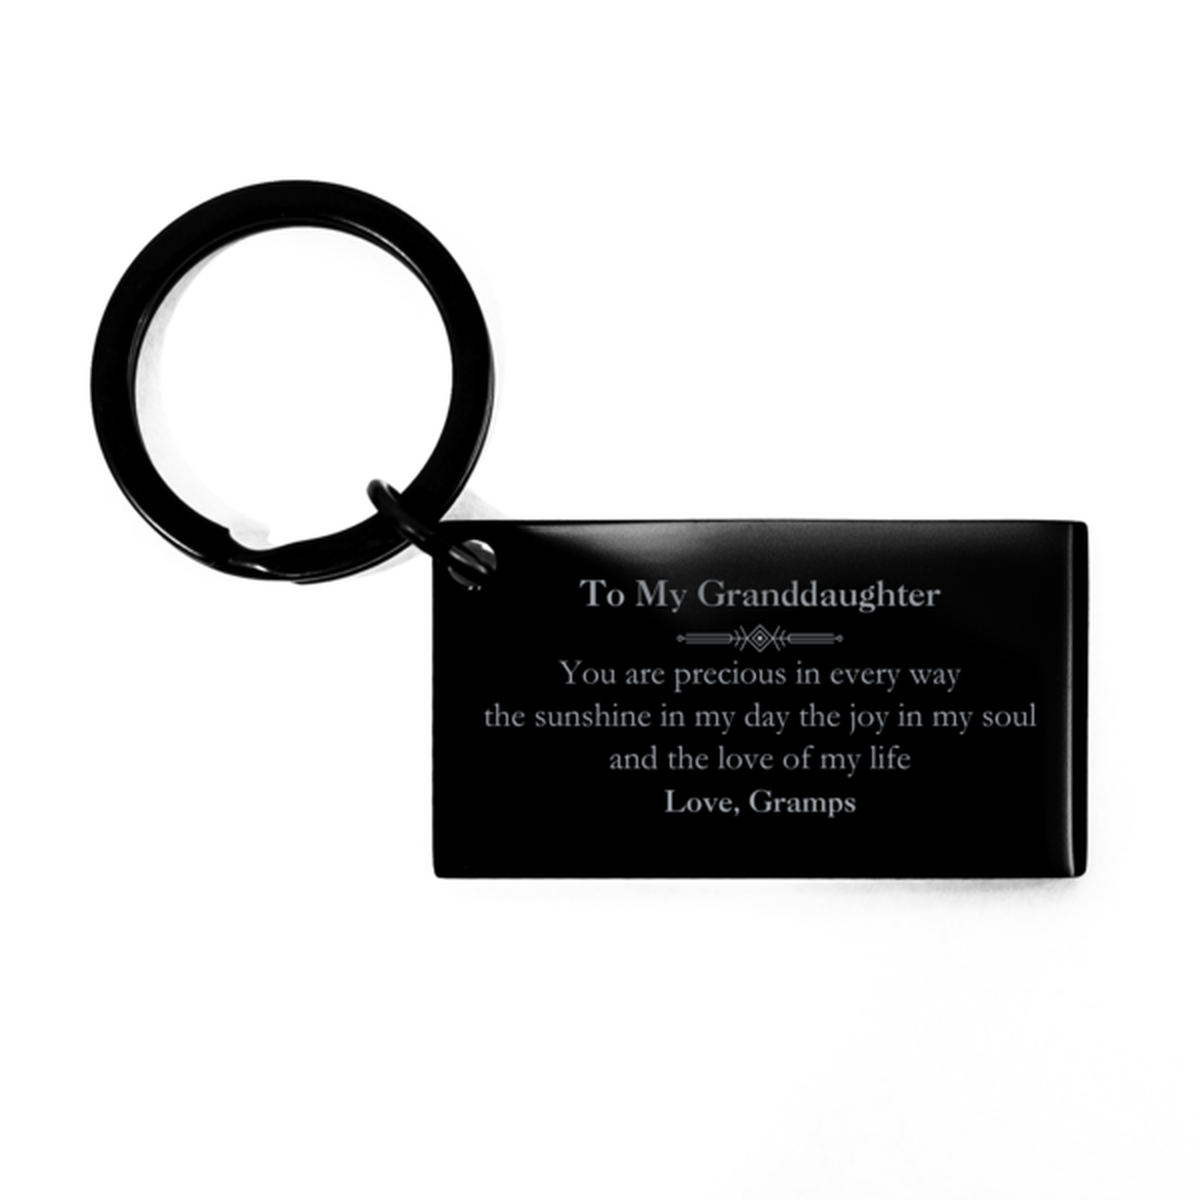 Graduation Gifts for Granddaughter Keychain Present from Gramps, Christmas Granddaughter Birthday Gifts Granddaughter You are precious in every way the sunshine in my day. Love, Gramps